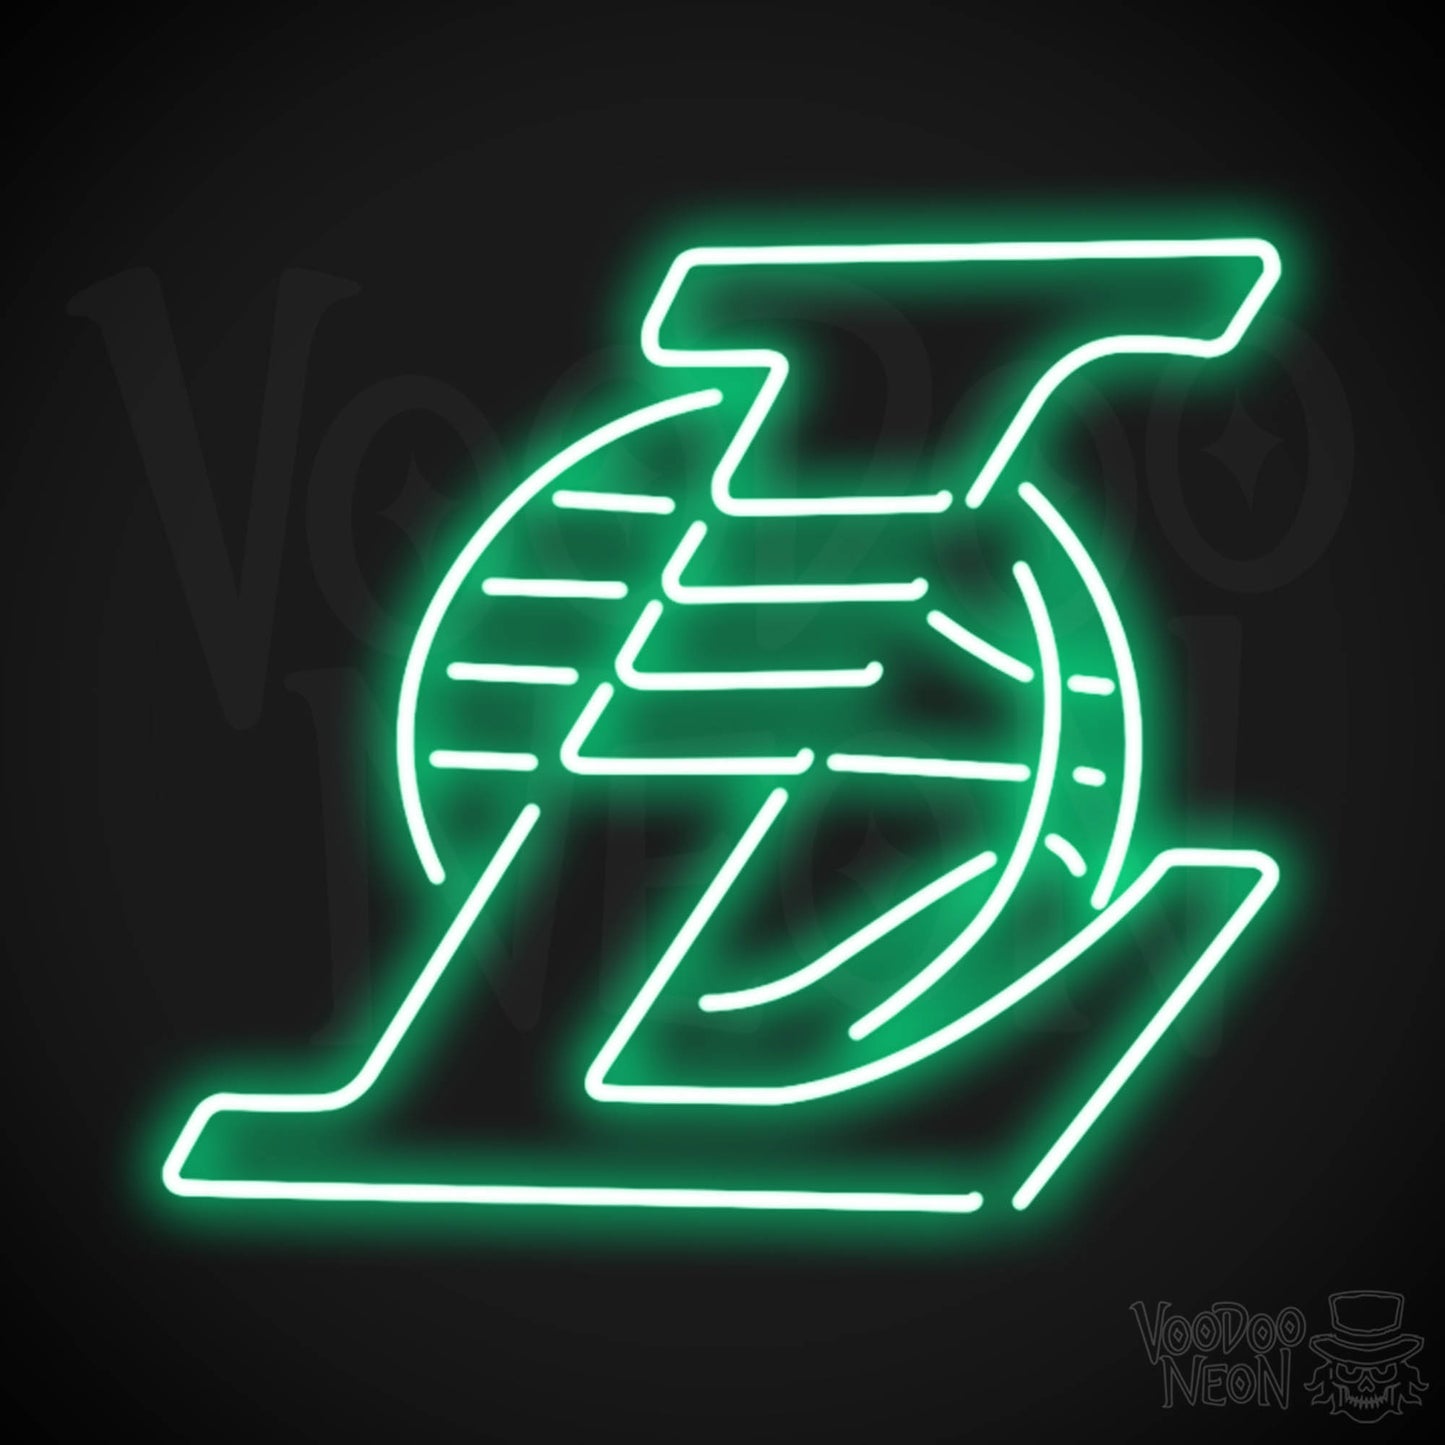 Los Angeles Lakers Neon Sign - Los Angeles Lakers Sign - Neon Lakers Logo Wall Art - Color Green